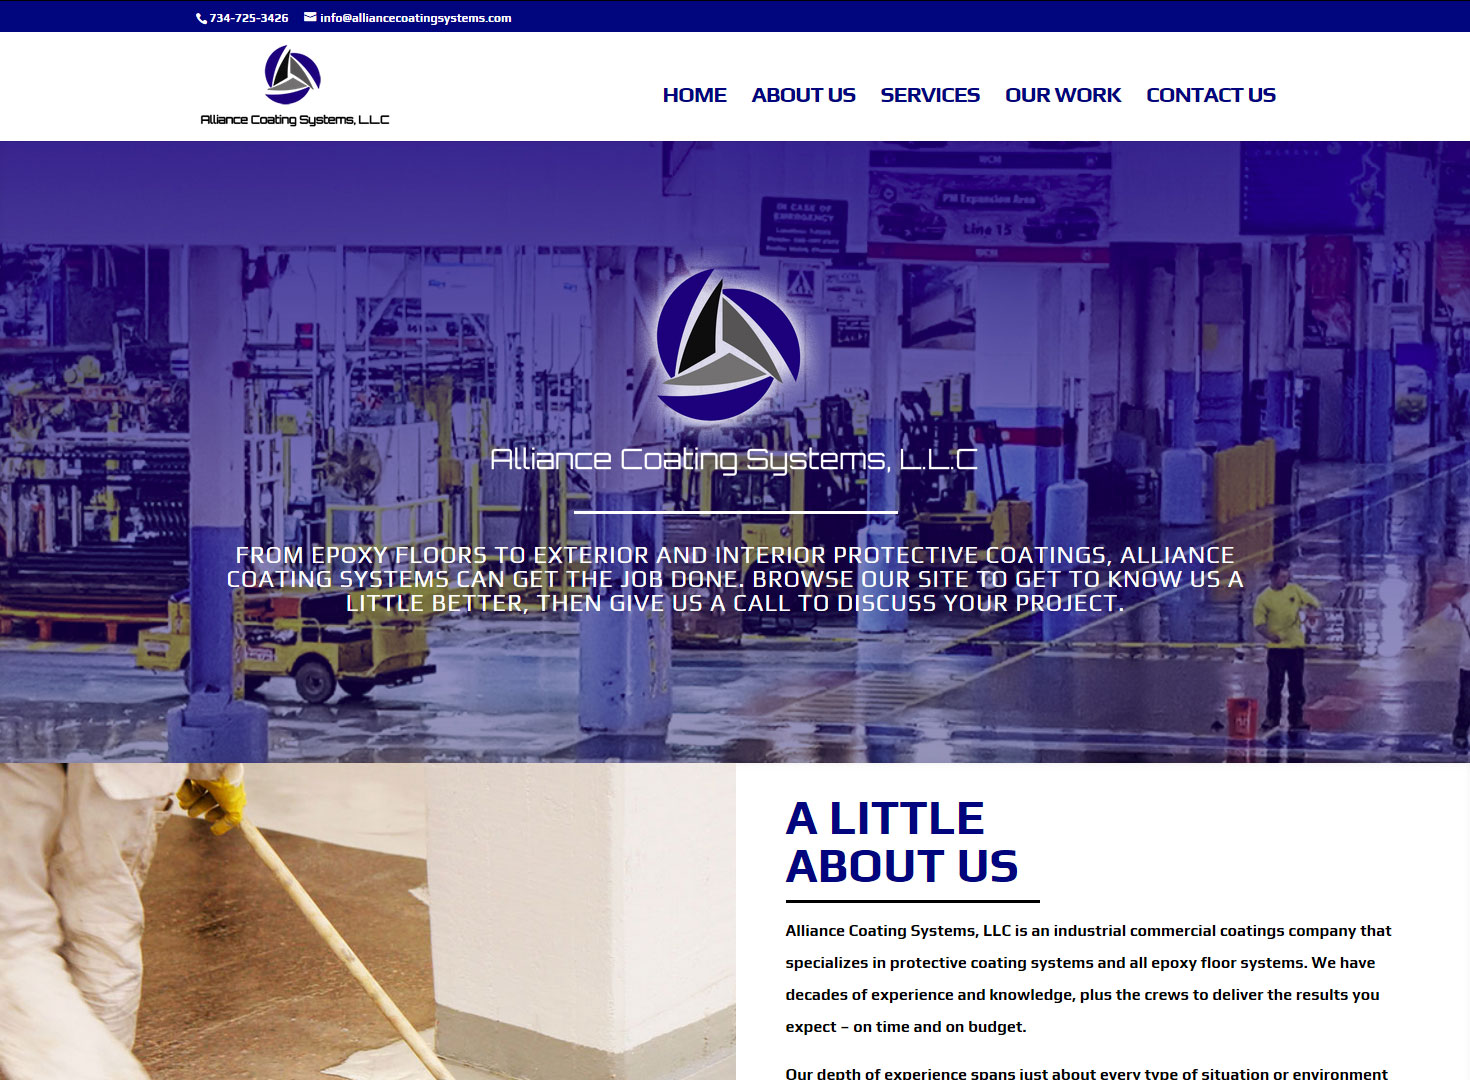 Alliance Coating Systems